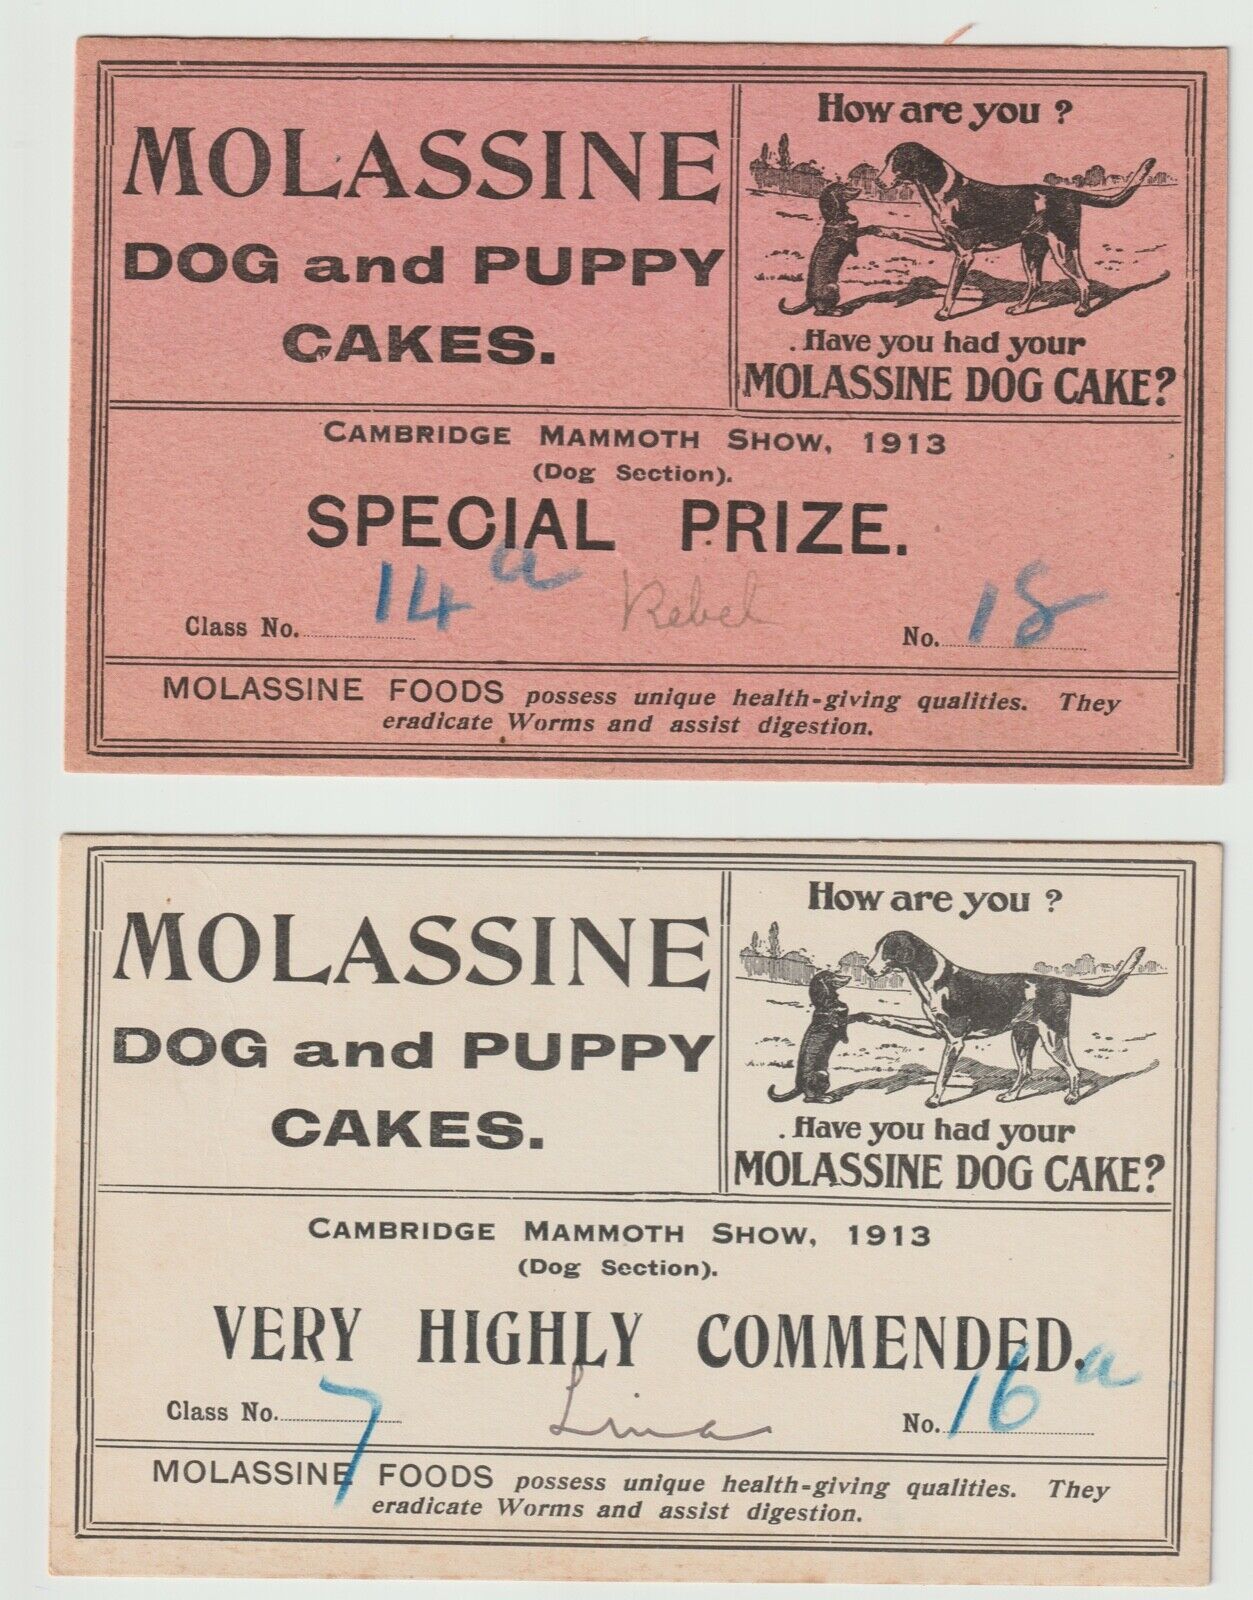 1913 Cambridge Mammoth Show Dog Section Prize Cards  (Two) 805J